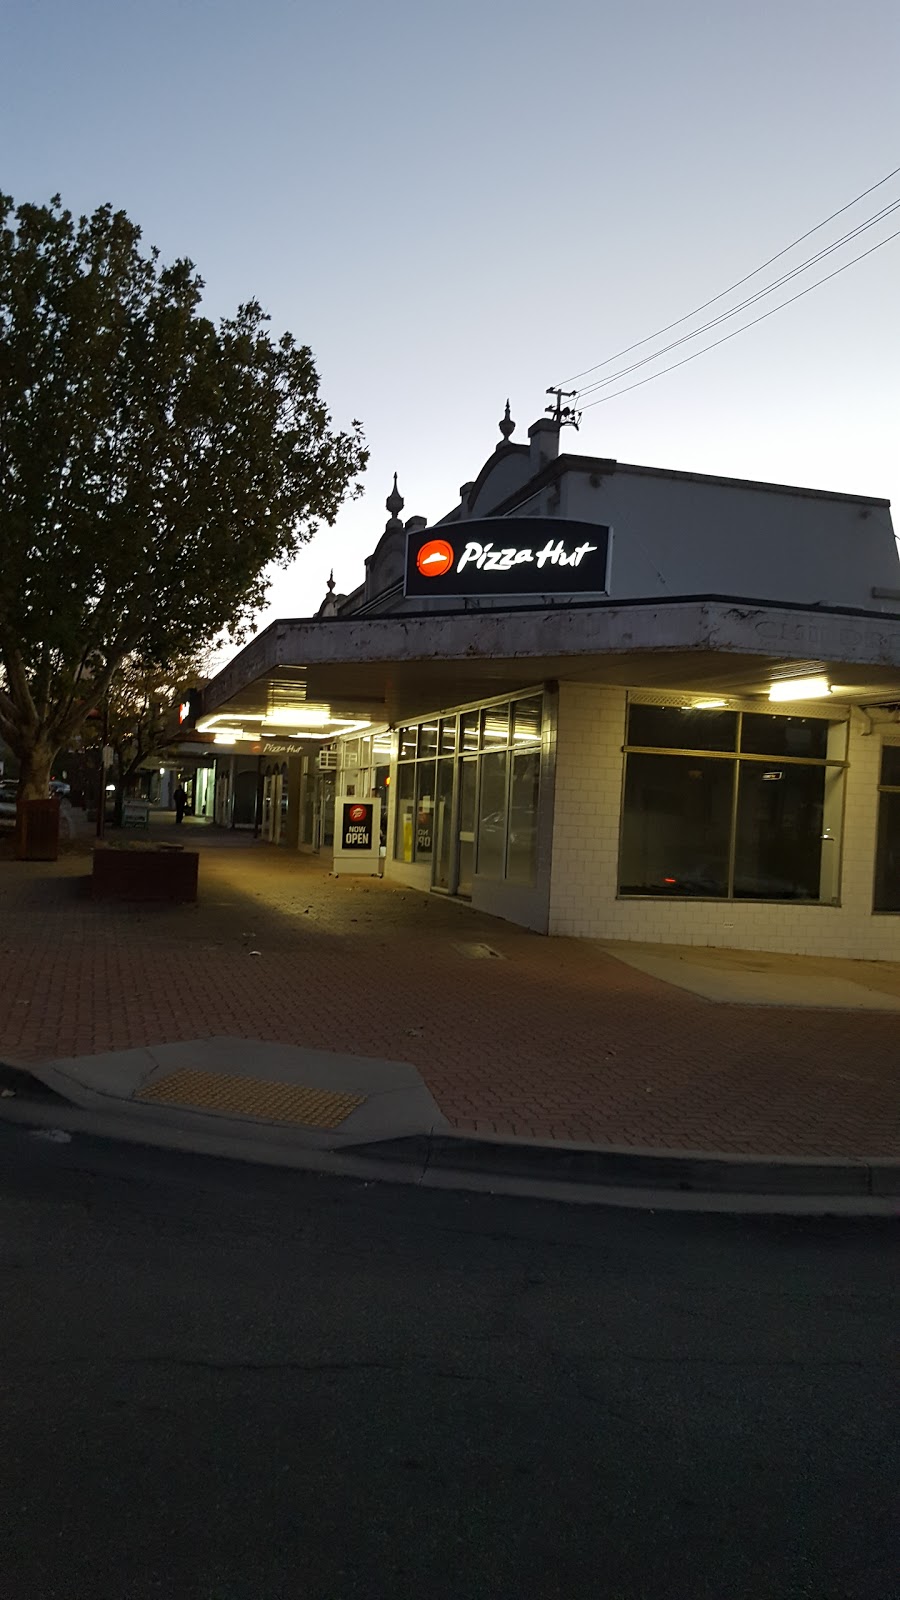 Pizza Hut Tumut | meal delivery | 35 Wynyard St, Tumut NSW 2720, Australia | 131166 OR +61 131166